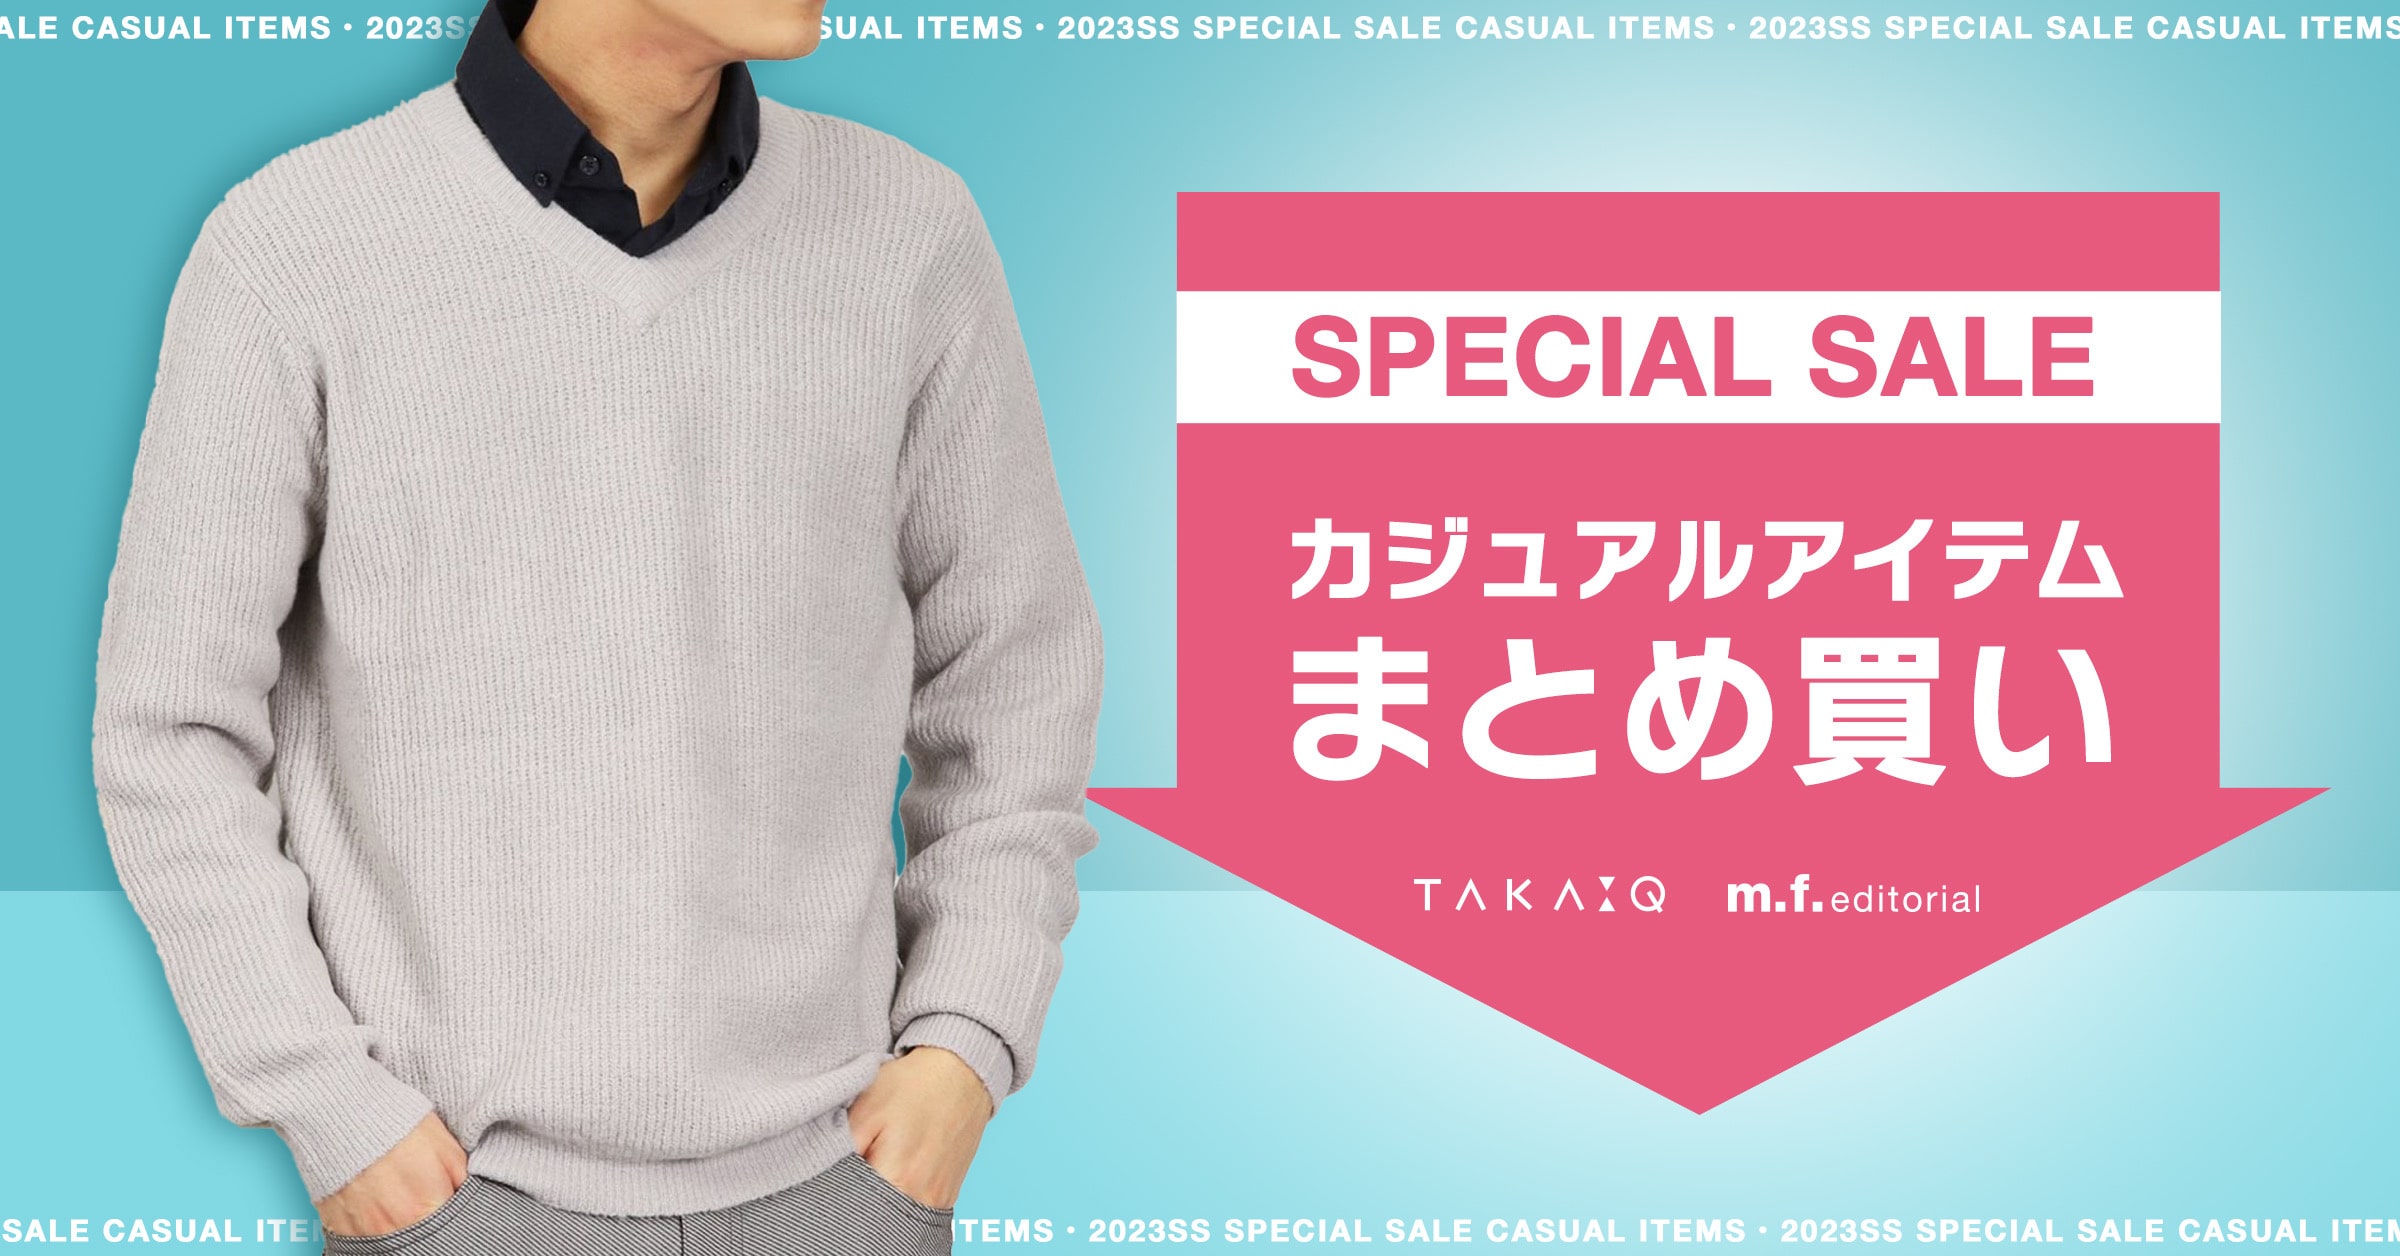 【SPECIAL SALE】カジュアルまとめ買い